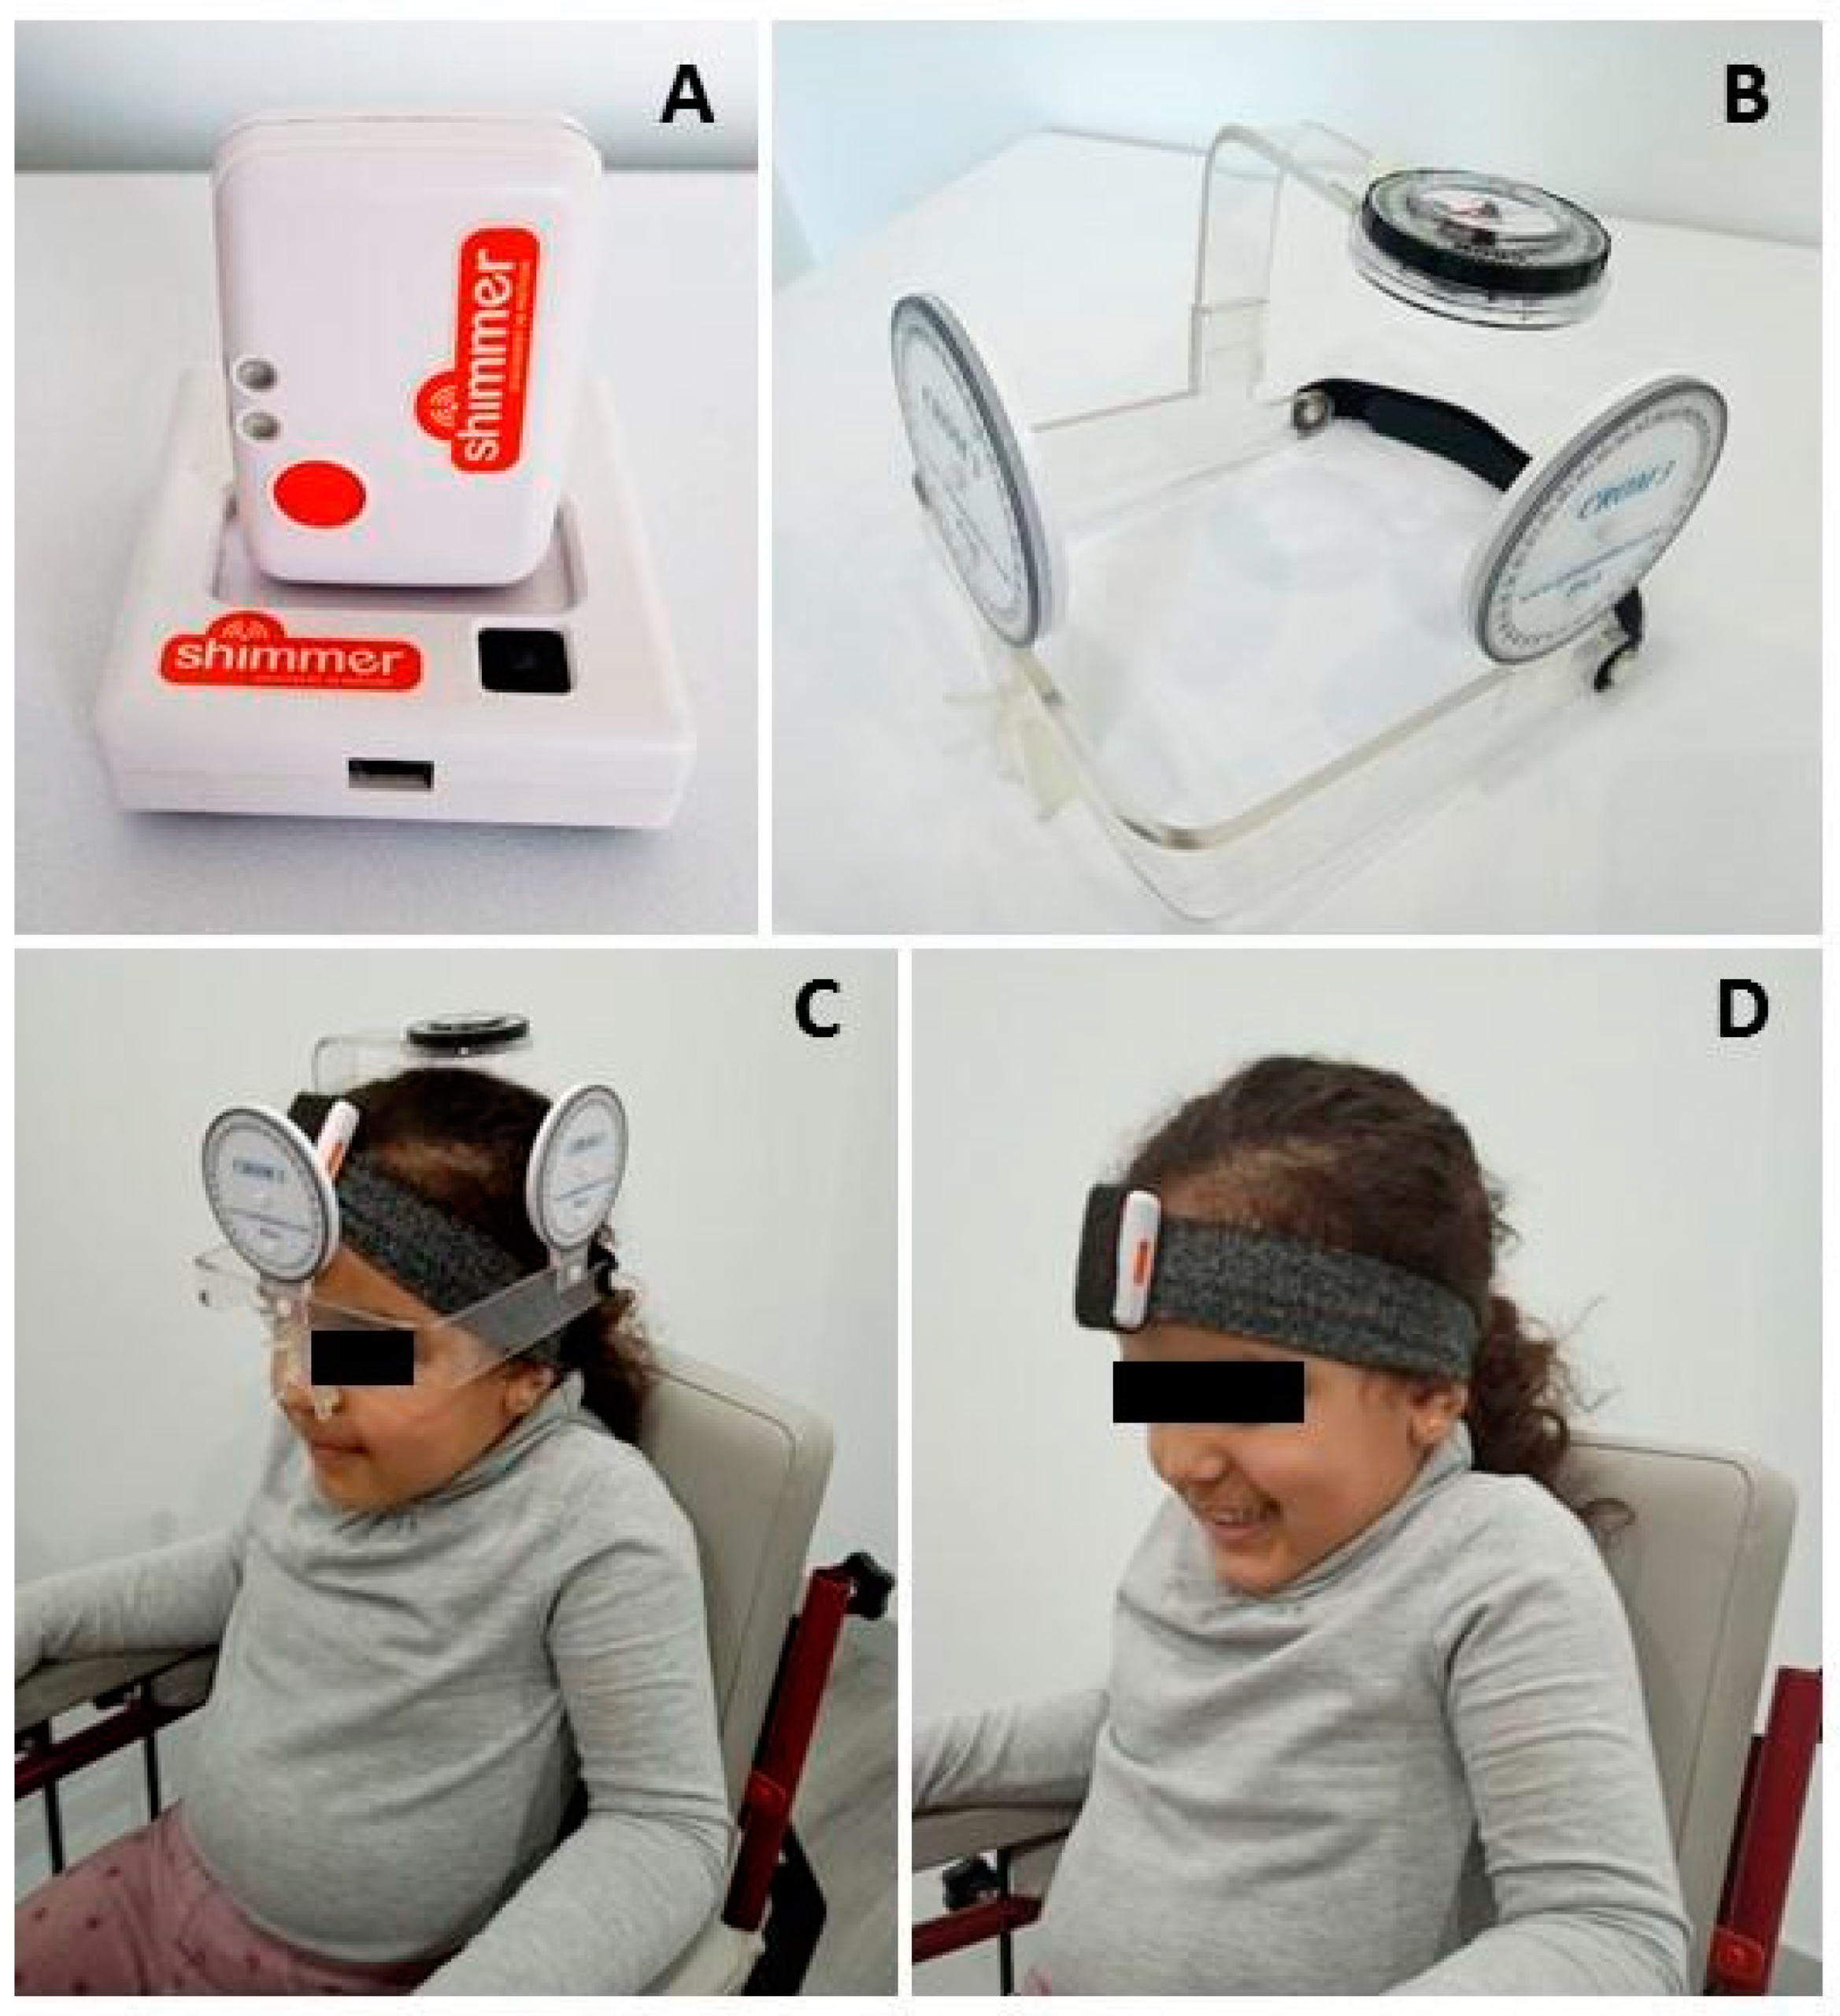 Diagnostics | Free Full-Text | Concurrent Validity and Reliability of an  Inertial Measurement Unit for the Assessment of Craniocervical Range of  Motion in Subjects with Cerebral Palsy